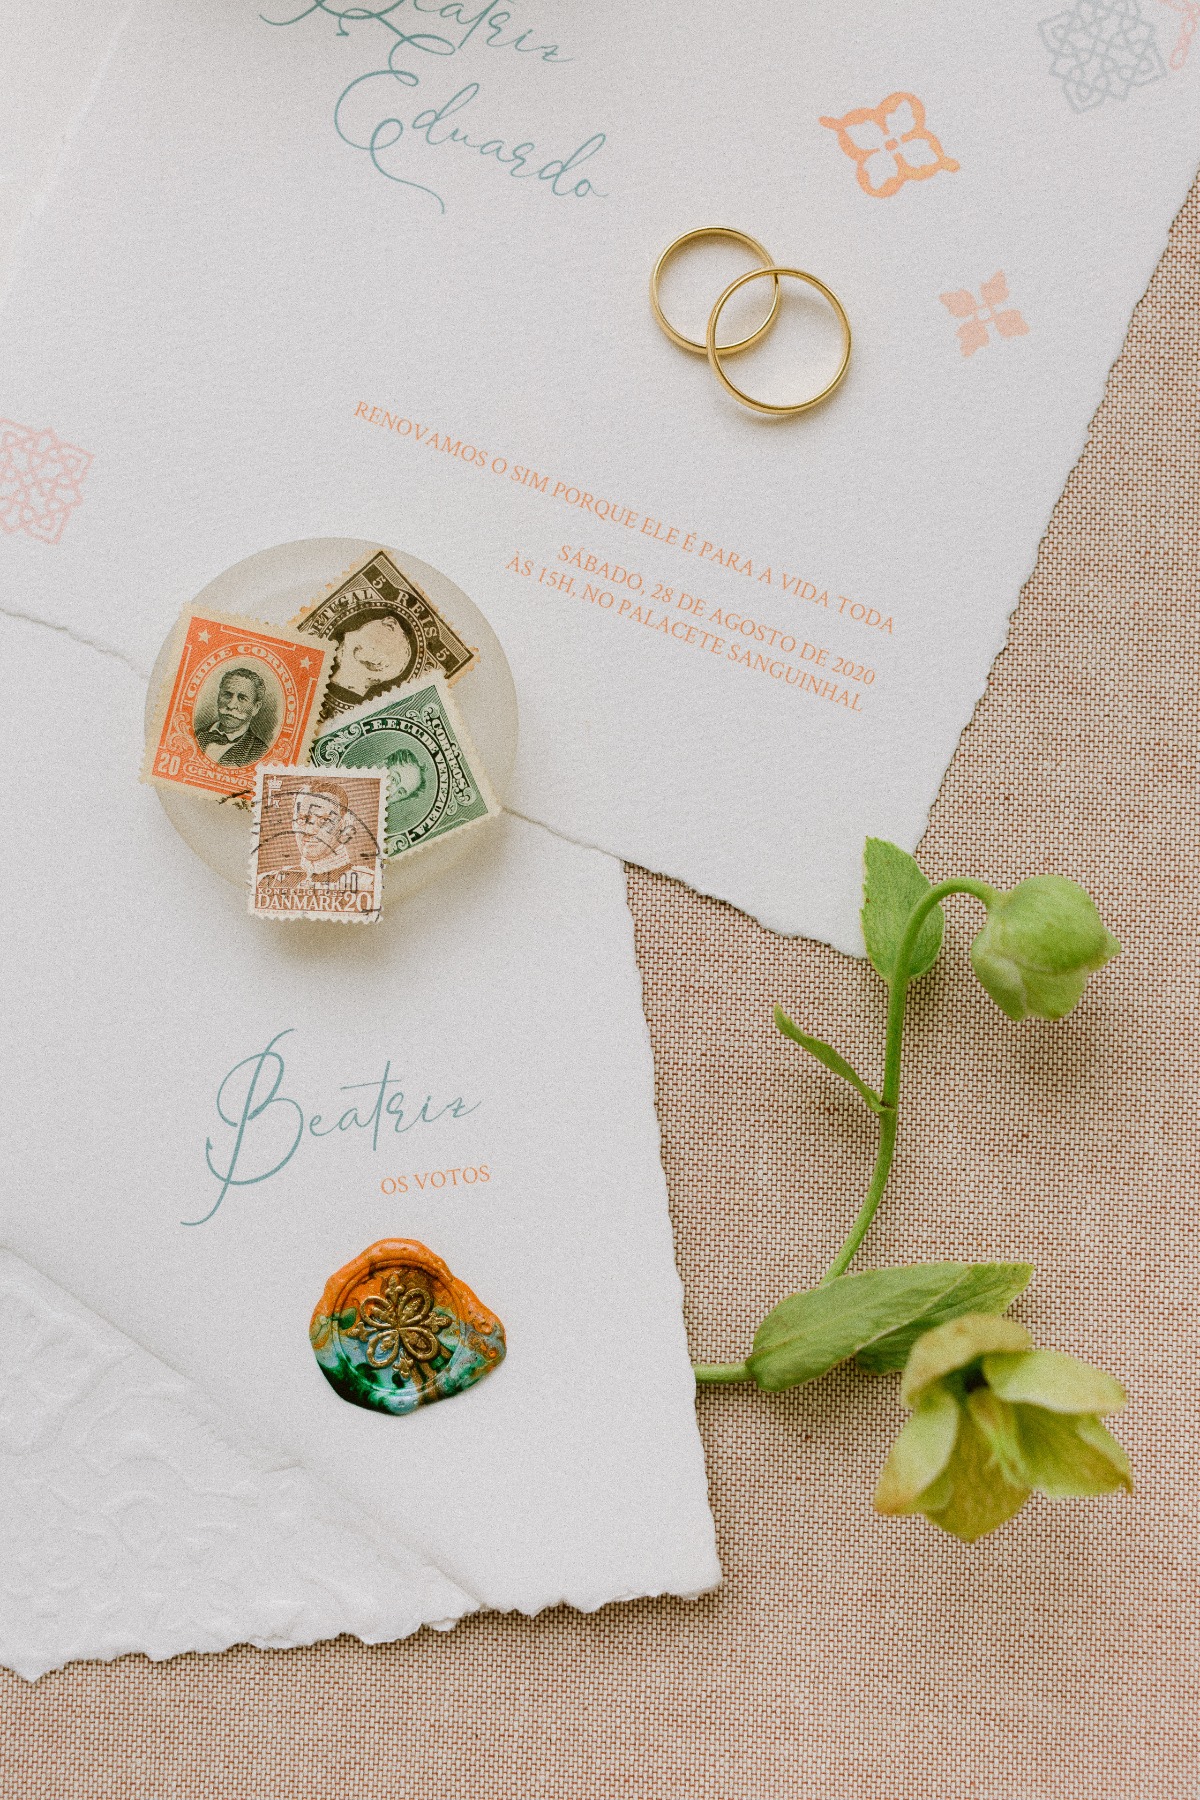 one of a kind wedding stationery created by A Pajarita